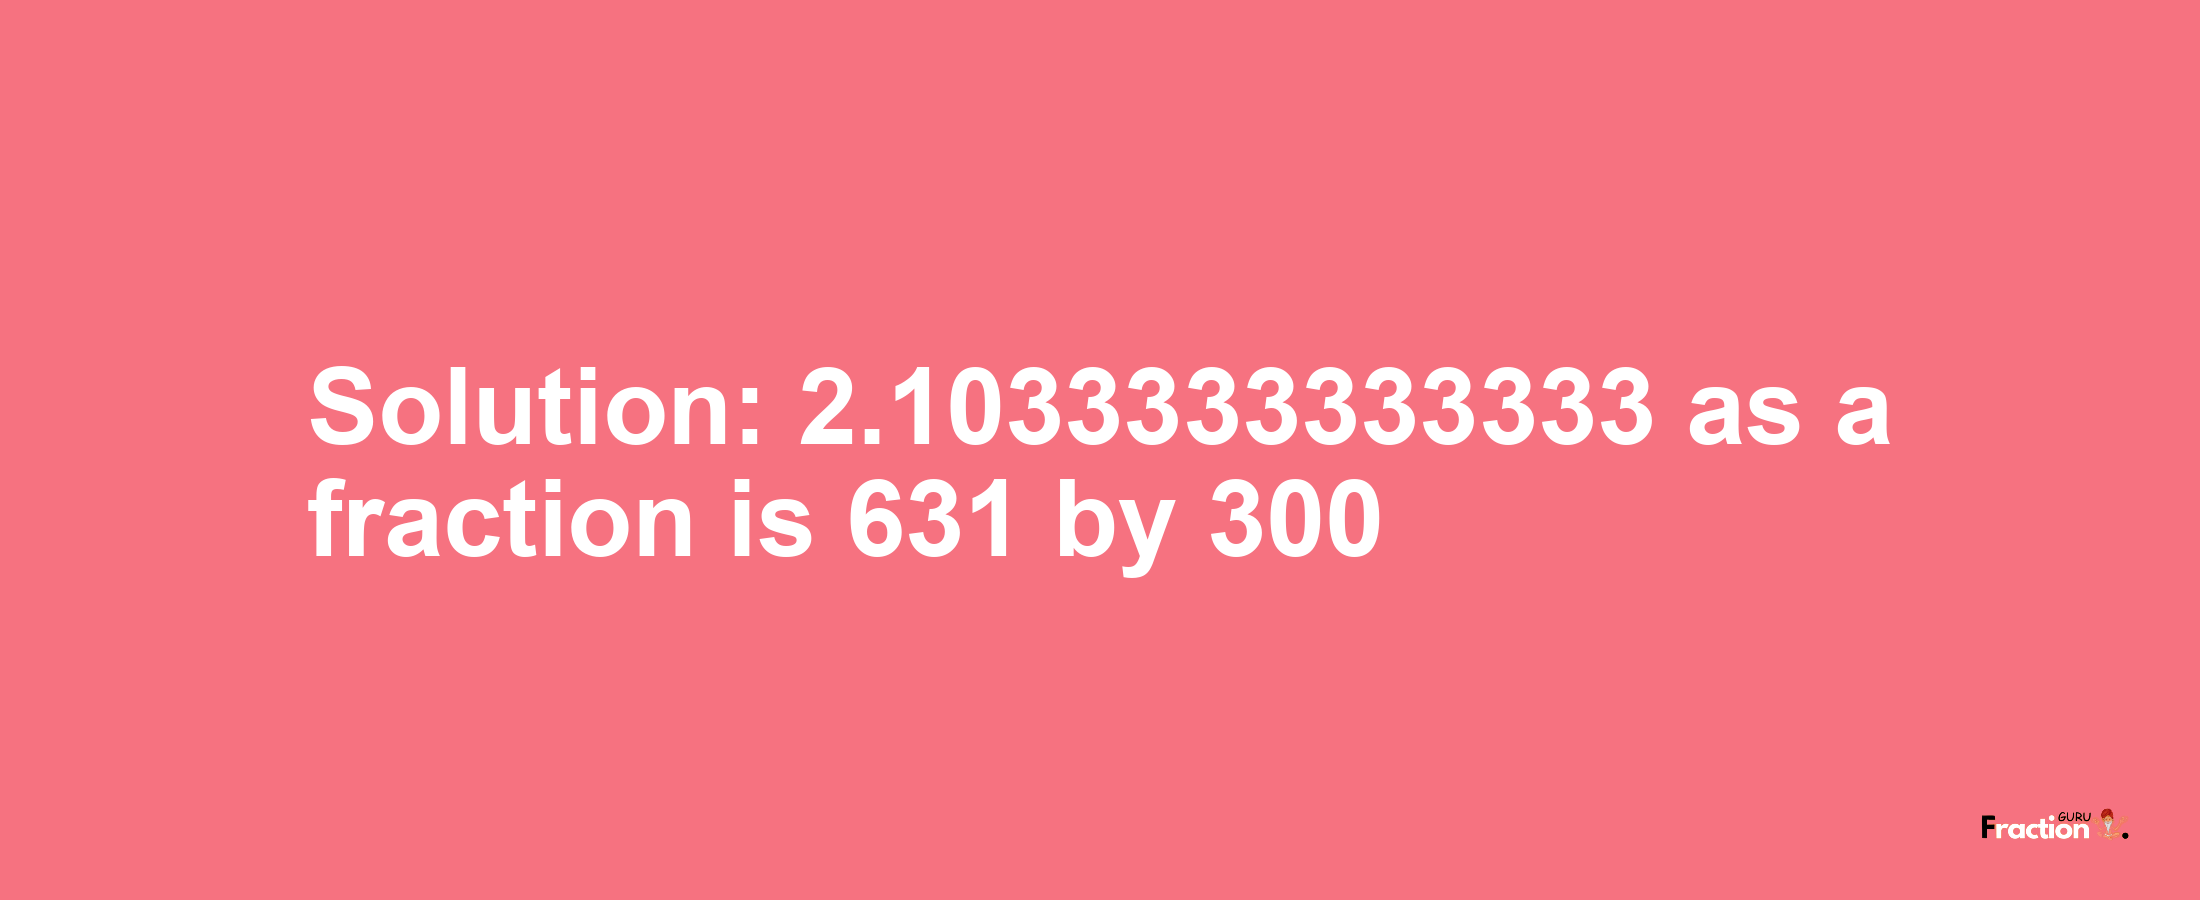 Solution:2.1033333333333 as a fraction is 631/300